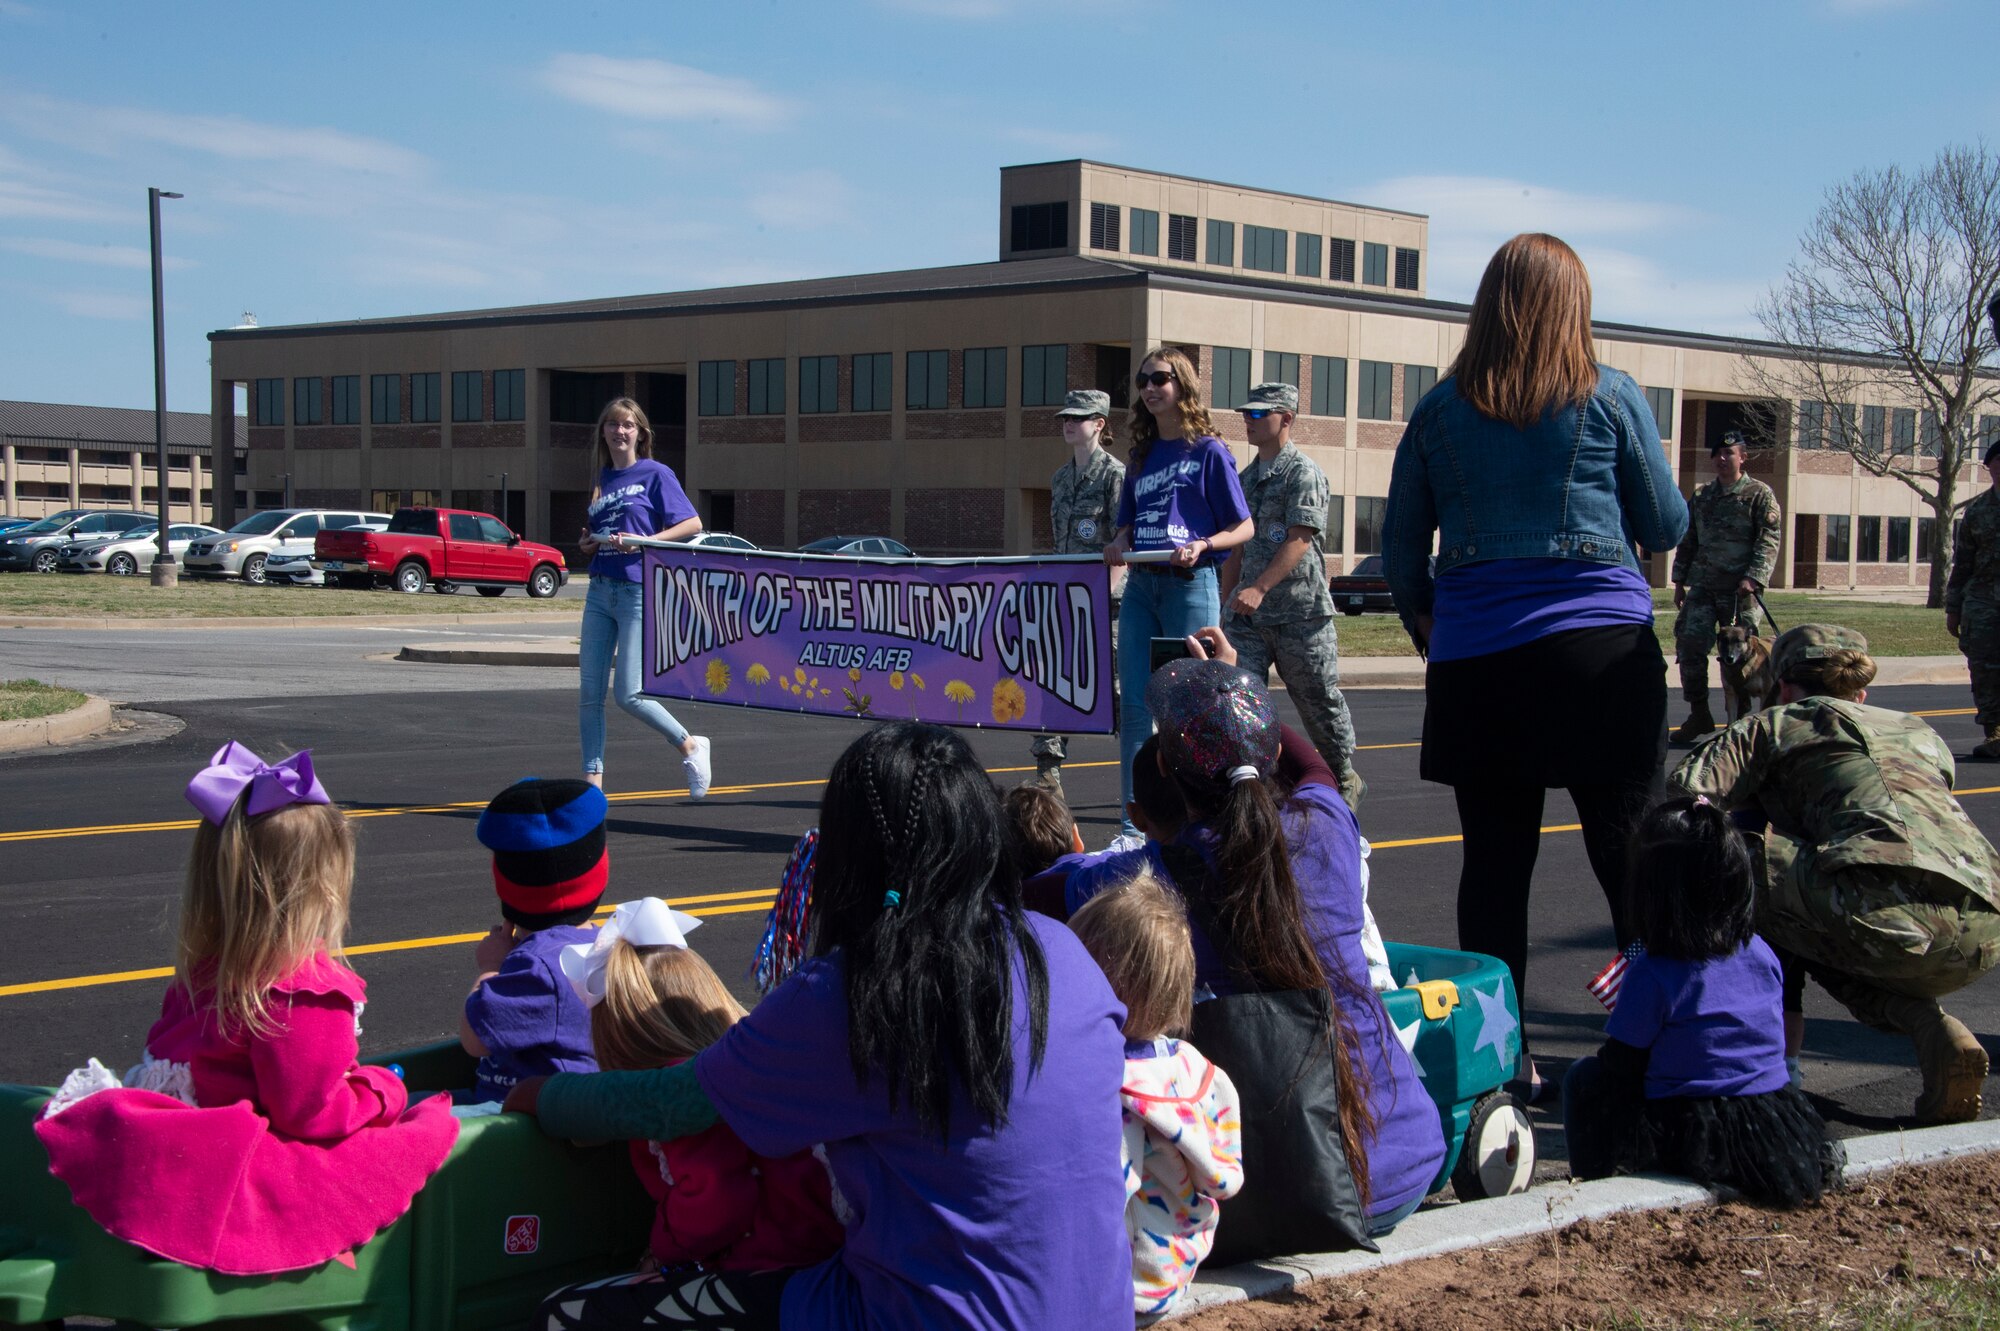 Members of the 97th Air Mobility Wing youth center watch the front of the Month of the Military Child parade, April 1, 2019, at Altus Air Force Base, Okla. After the parade passed by, the members joined in to walk with the rest of the agencies supporting the event. (U.S. Air Force photo by Senior Airman Cody Dowell)